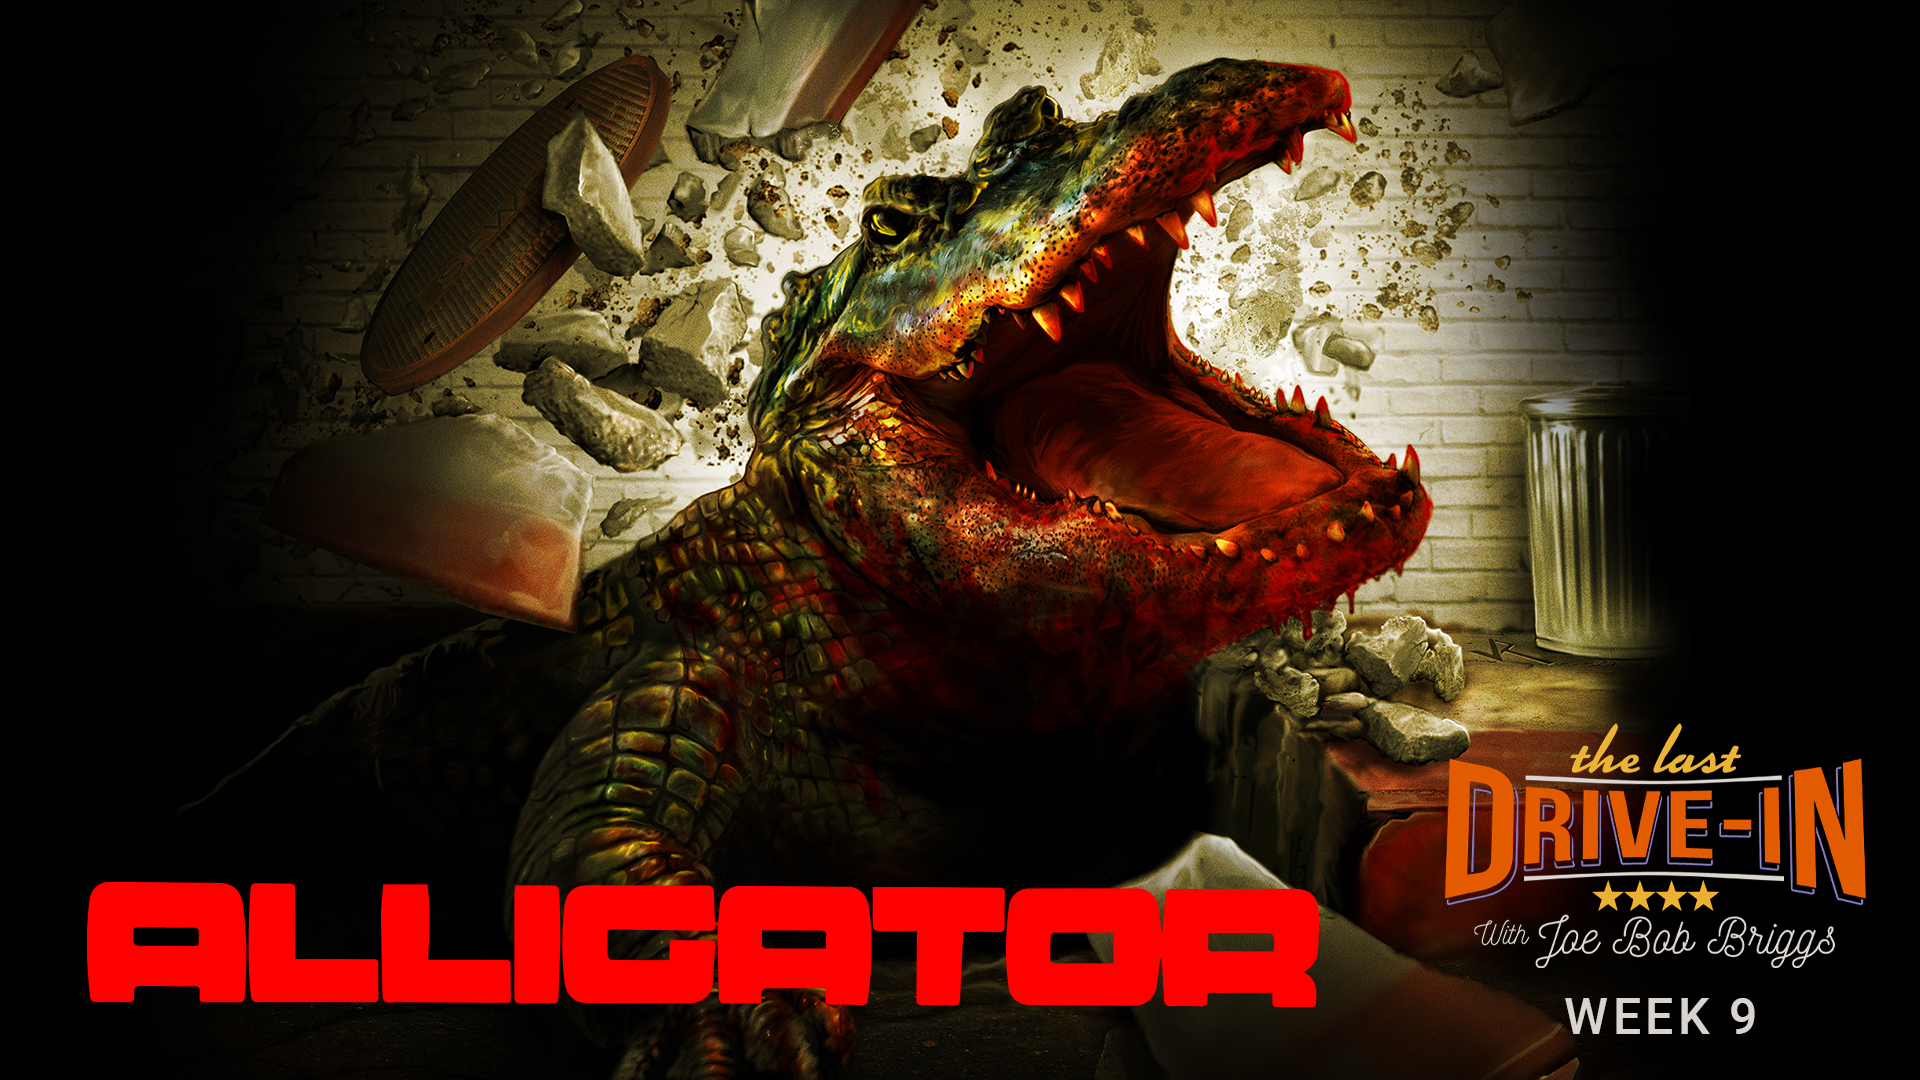 Week 9: Alligator, A baby alligator grows gigantic and goes on a rampage., TV-MA, Season 1062609, Episode 17